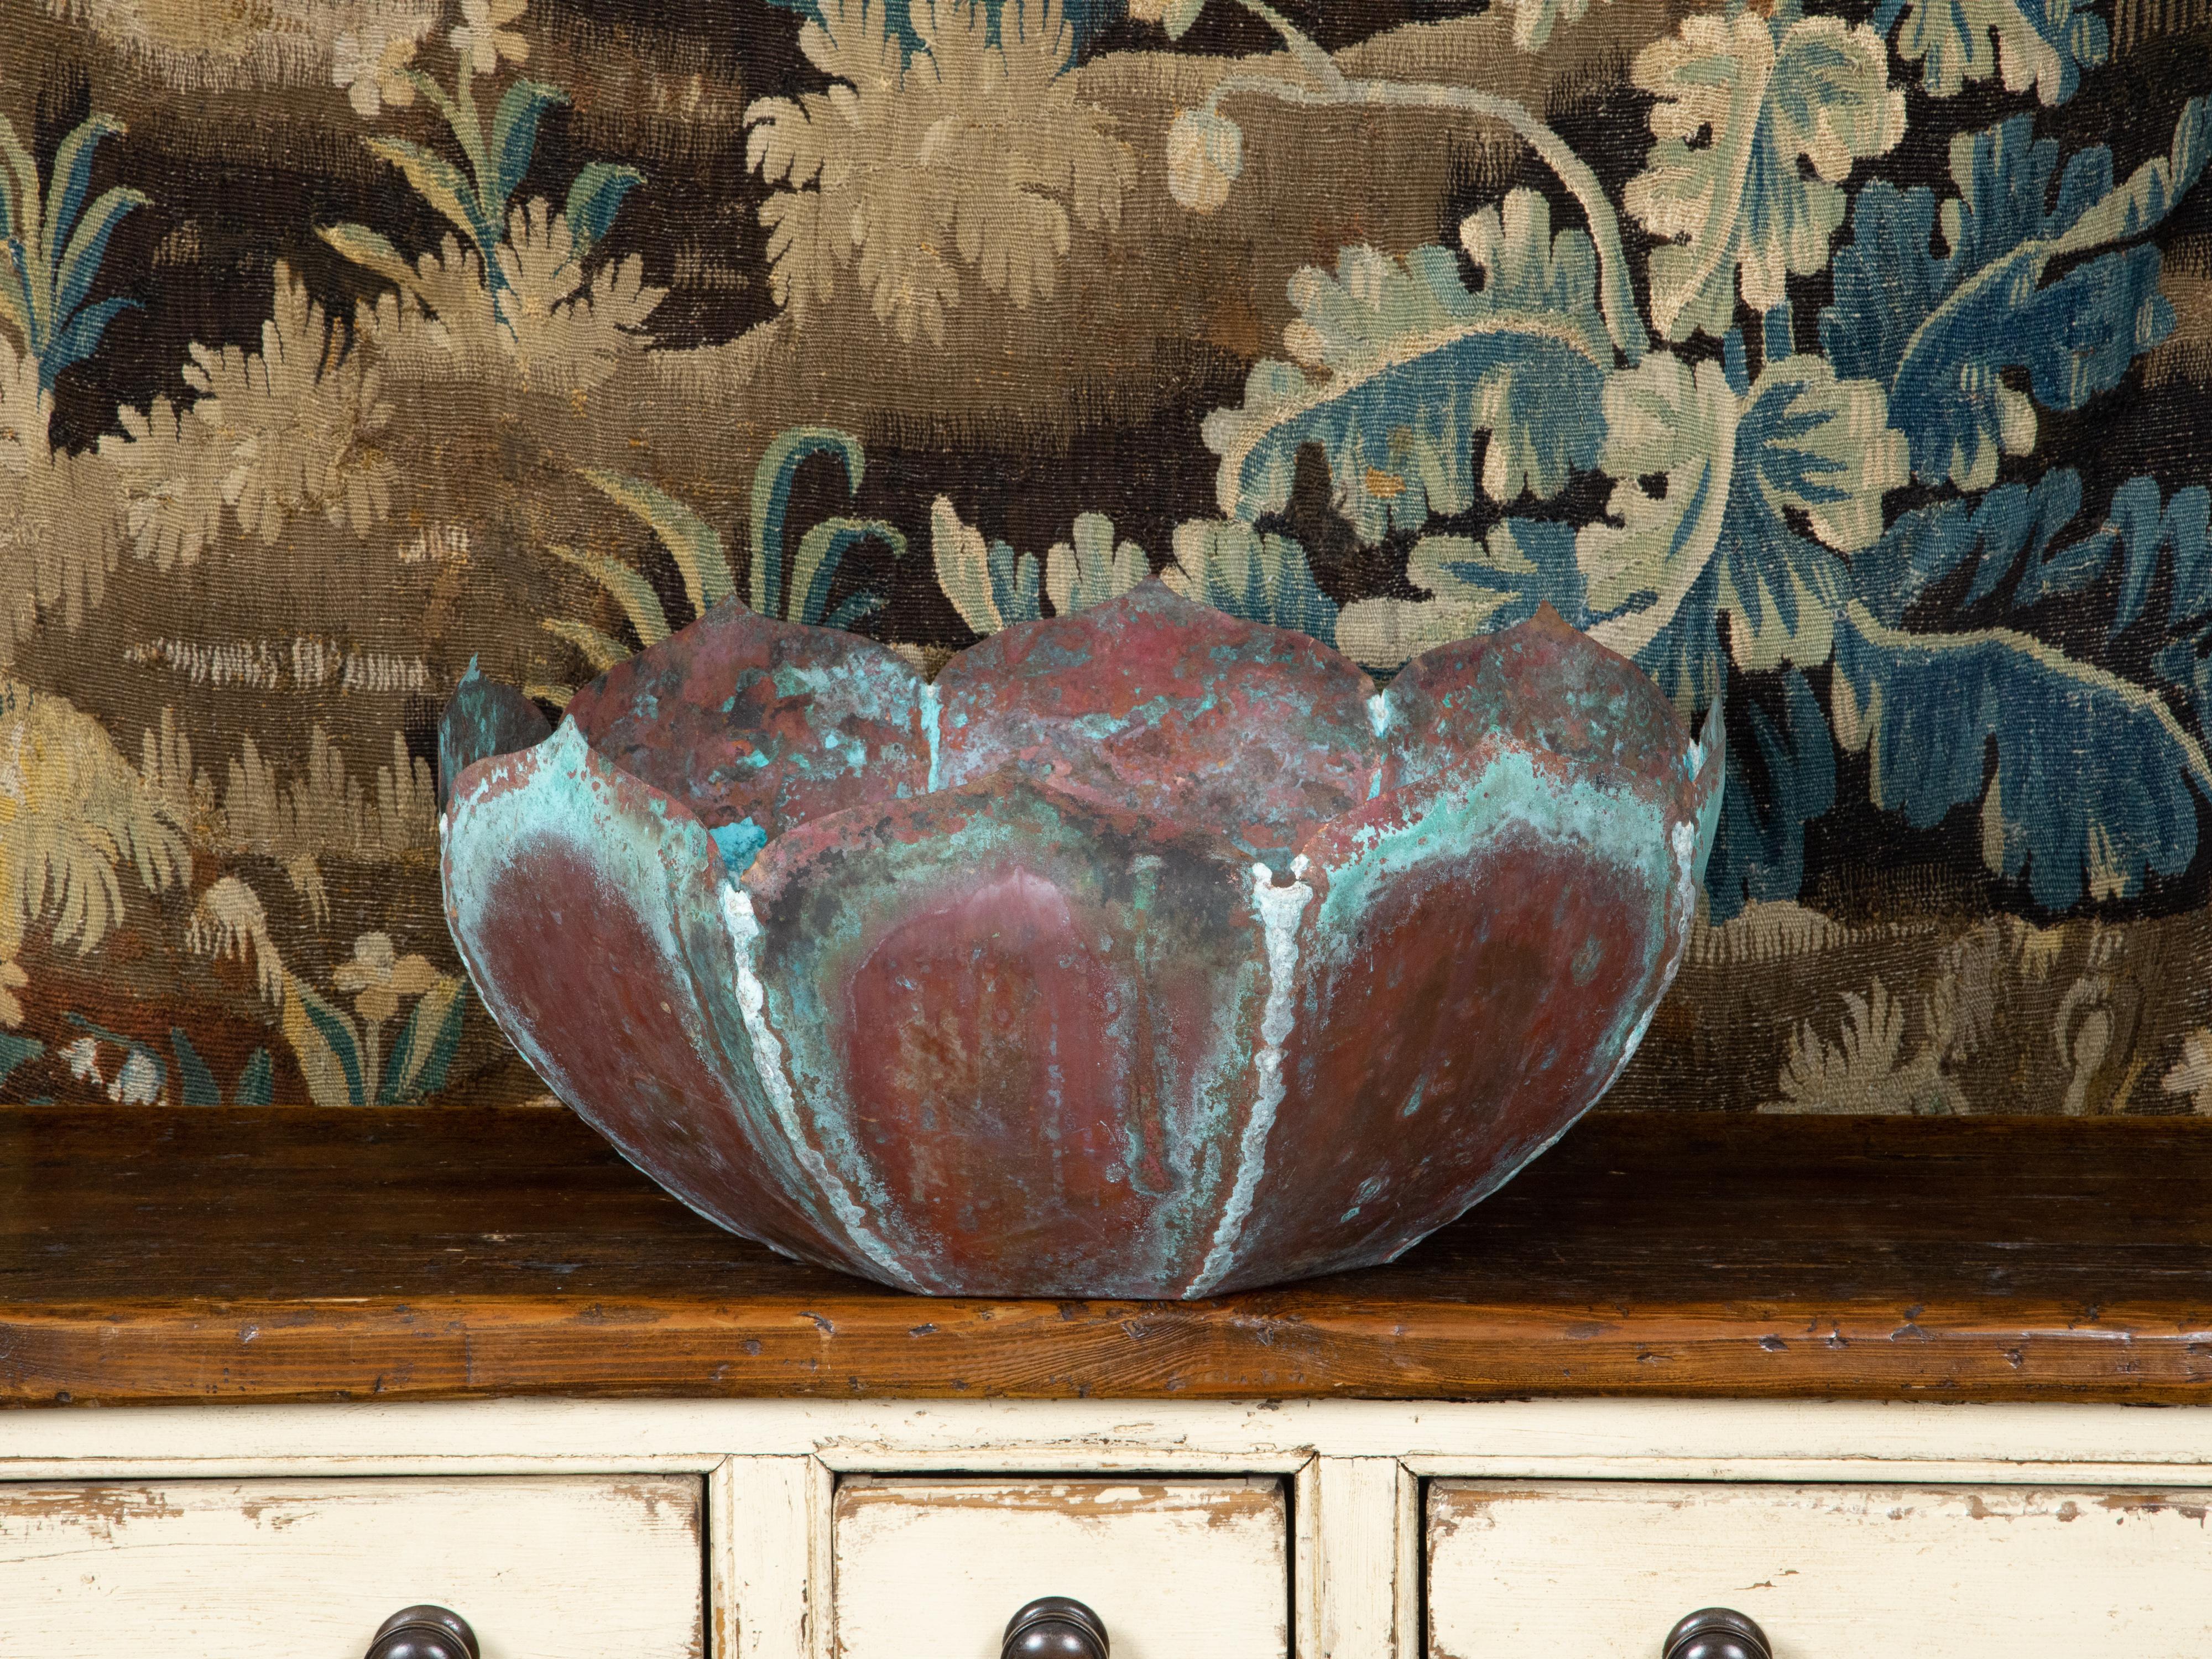 Patinated Midcentury Lotus Flower Shaped Decorative Copper Bowl with Verdigris Patina